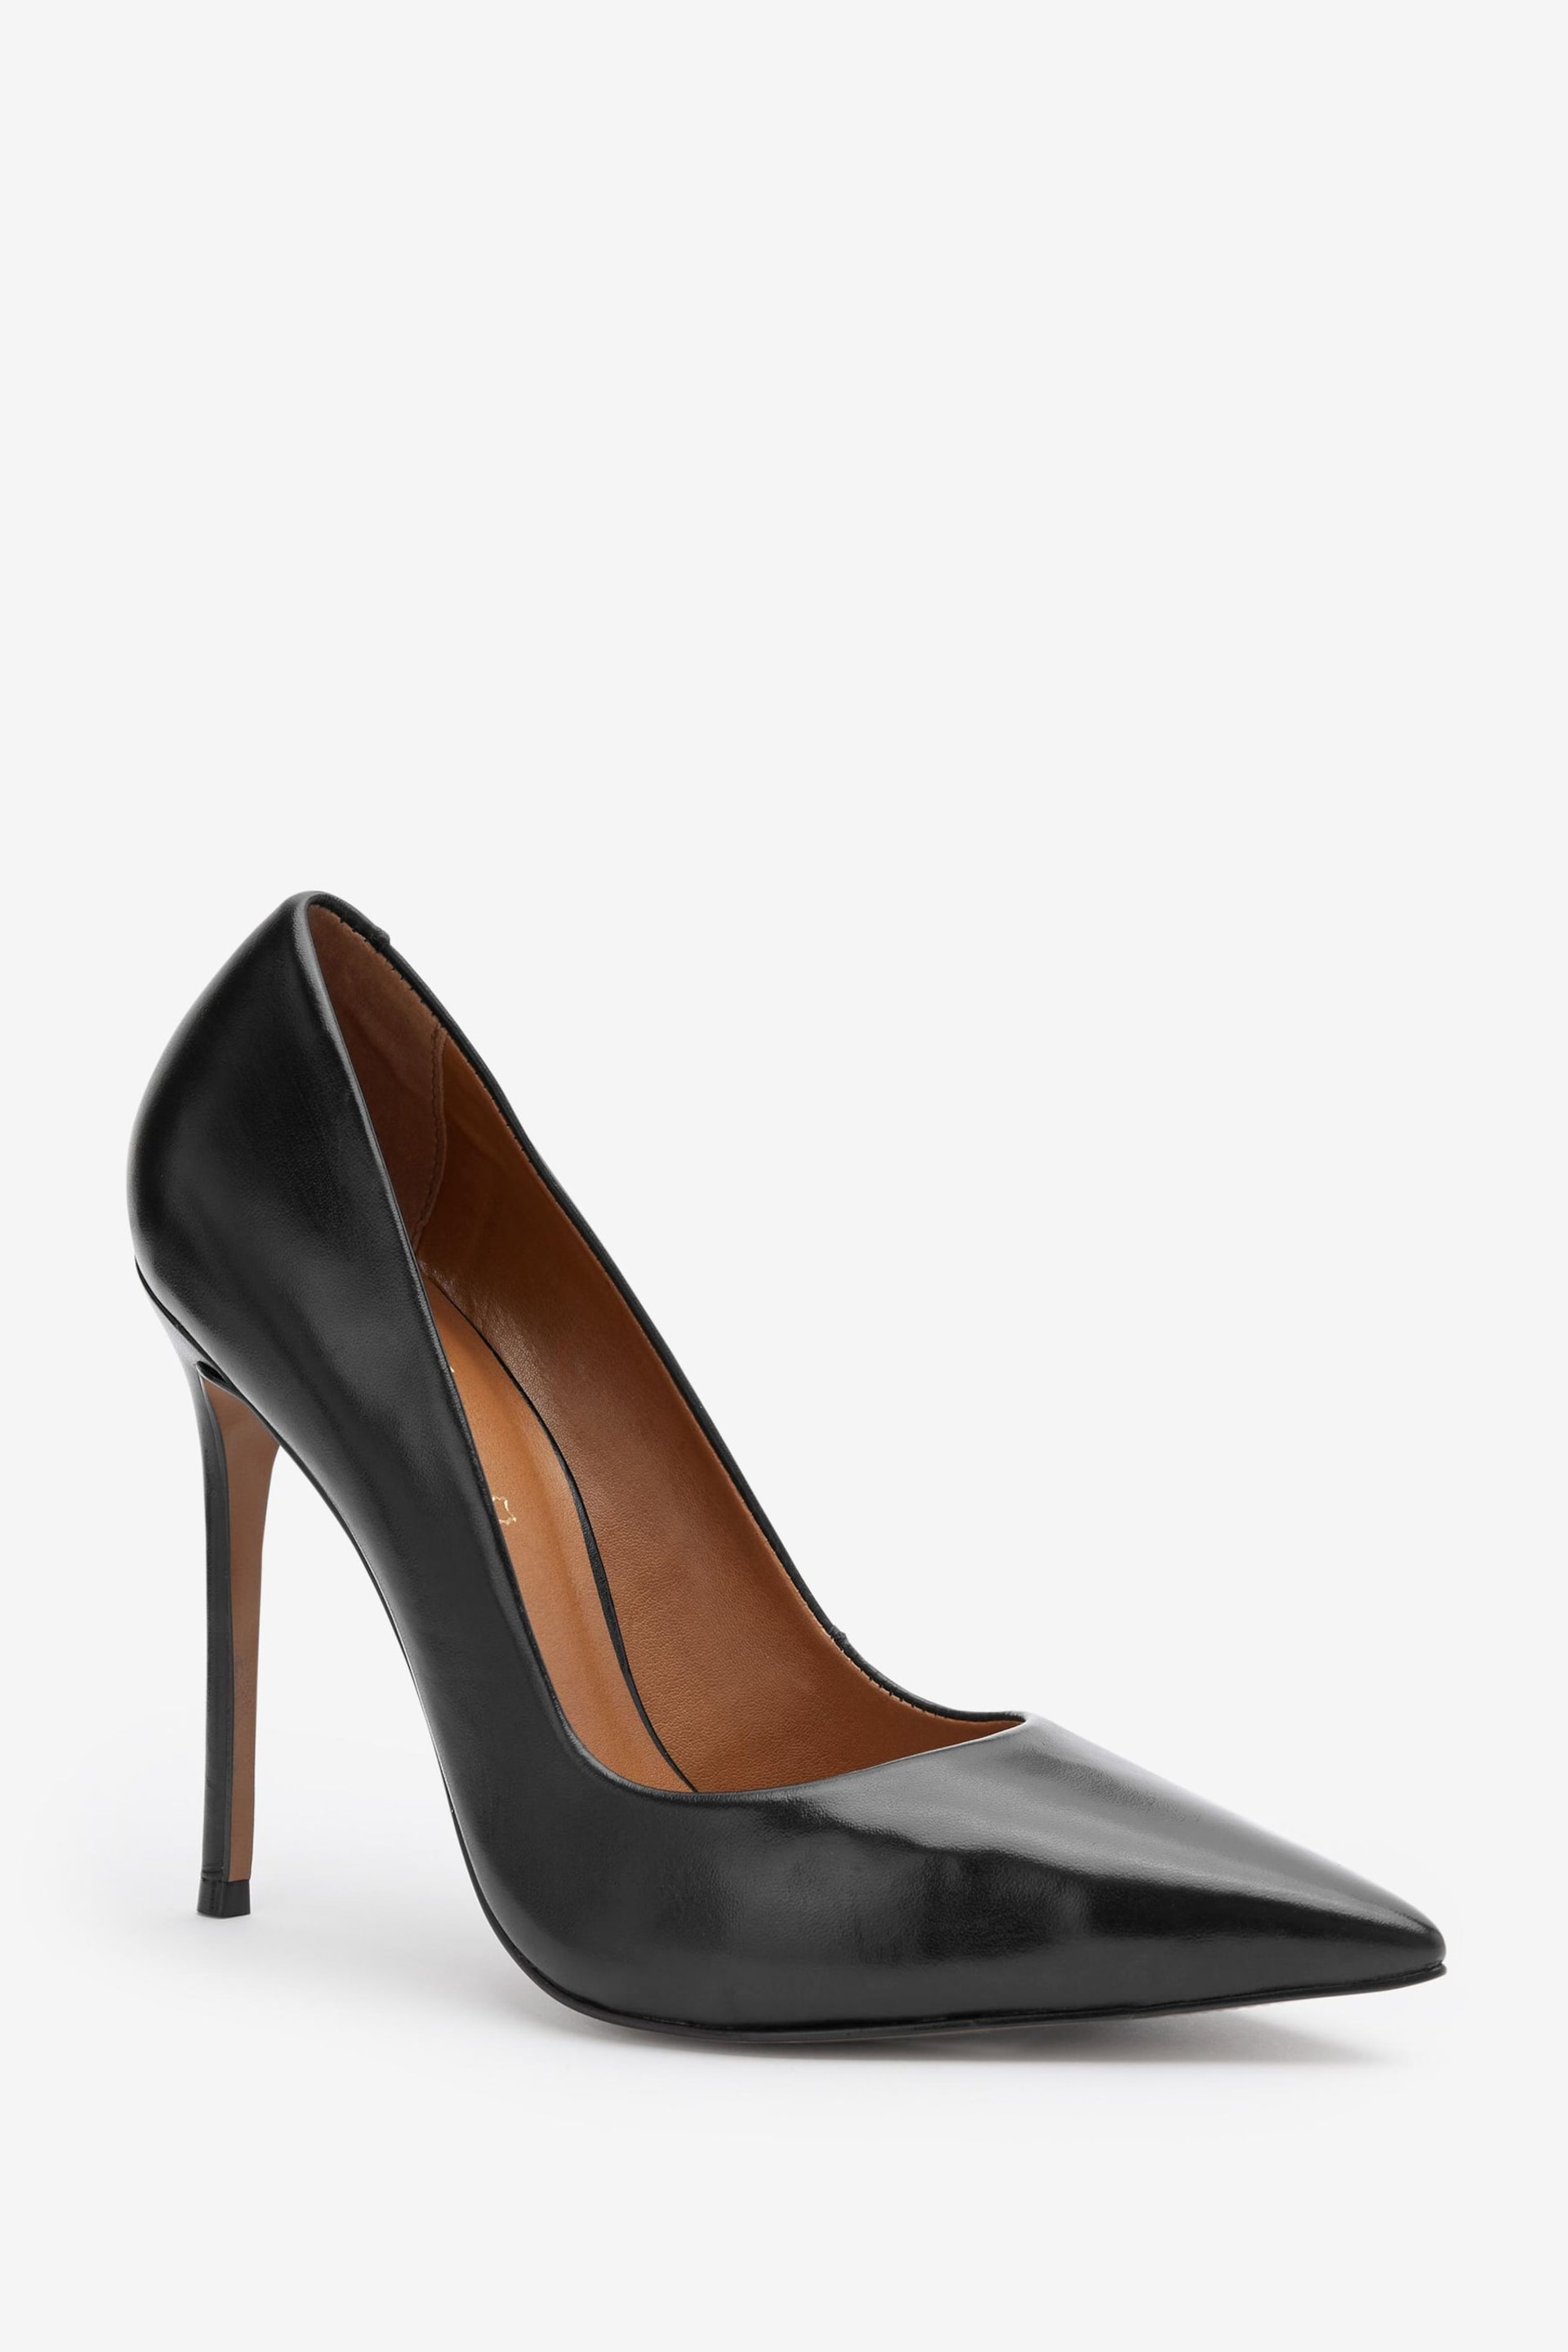 Black Signature Leather Court Shoes - Image 4 of 6